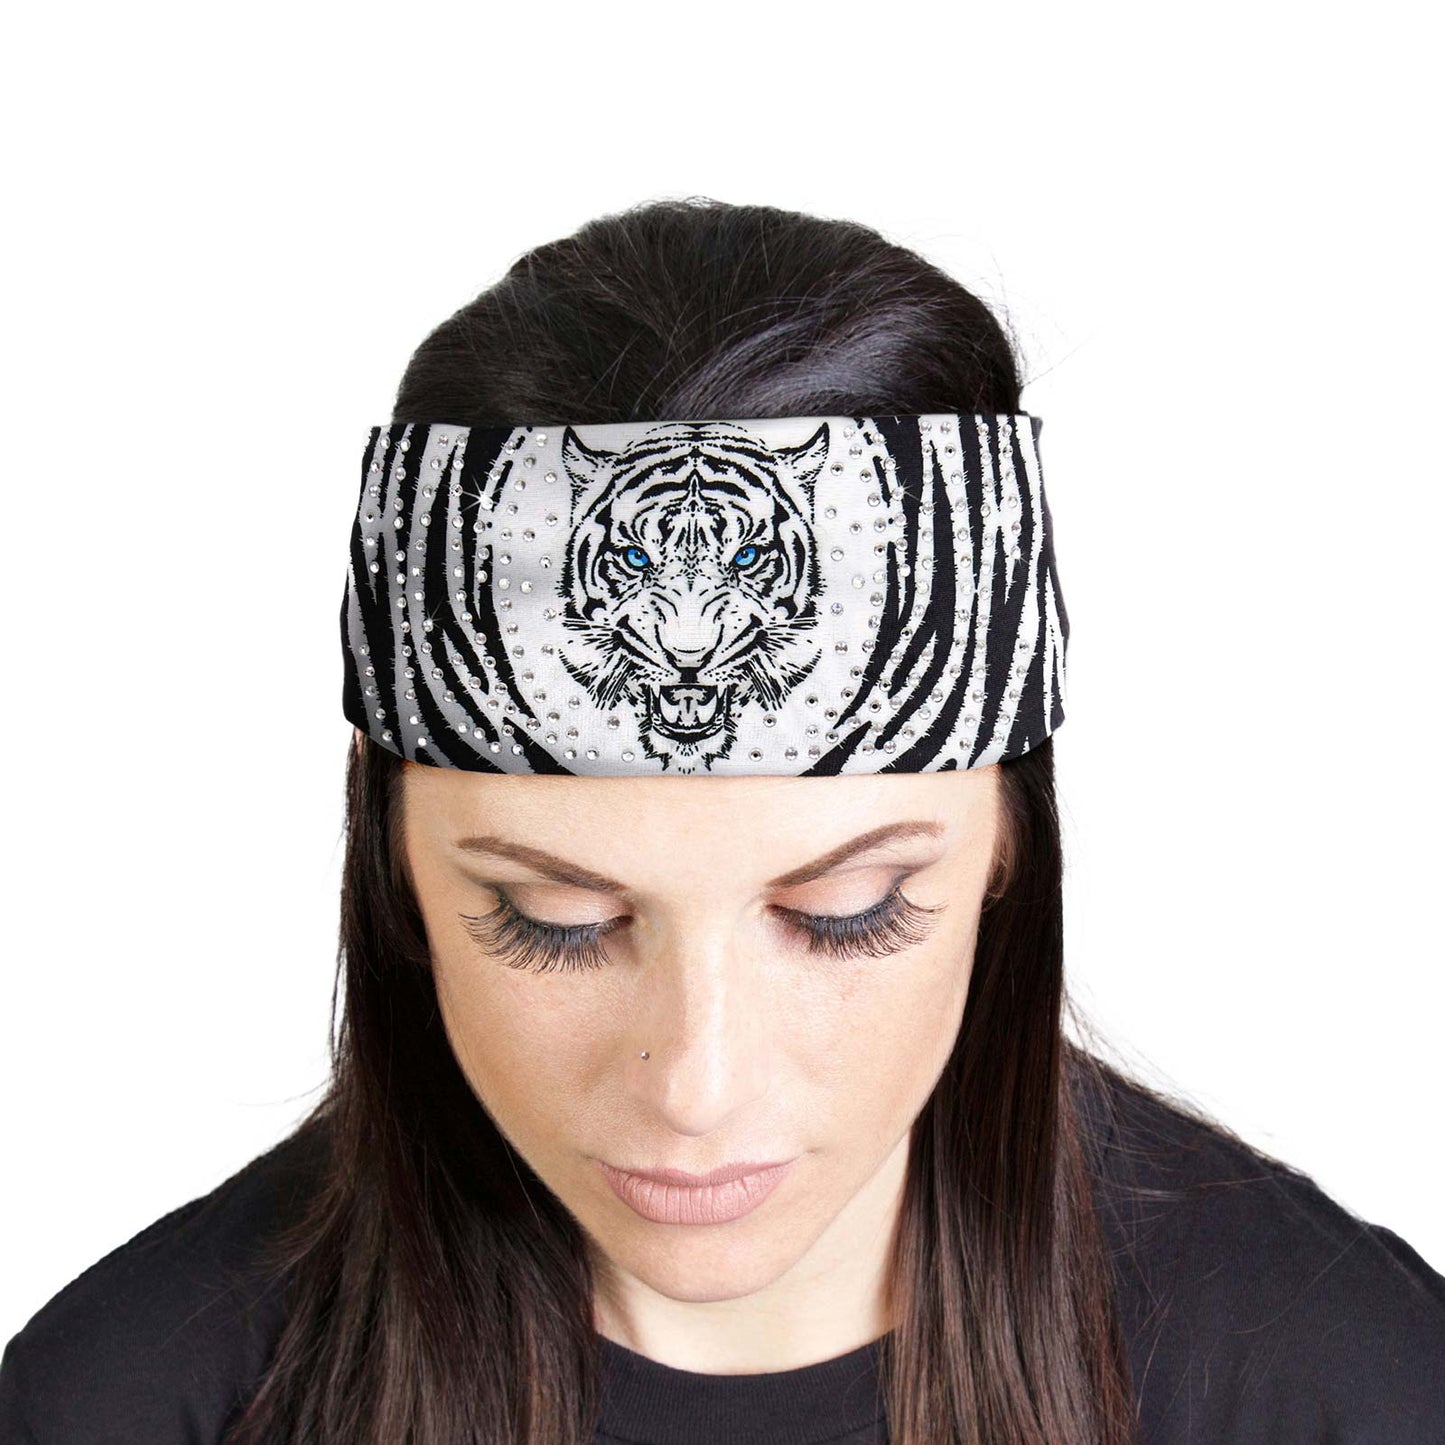 Milwaukee Leather | Bling Designed Wide Headbands-Headwraps for Women Biker Bandana with White Tiger - MLA8050